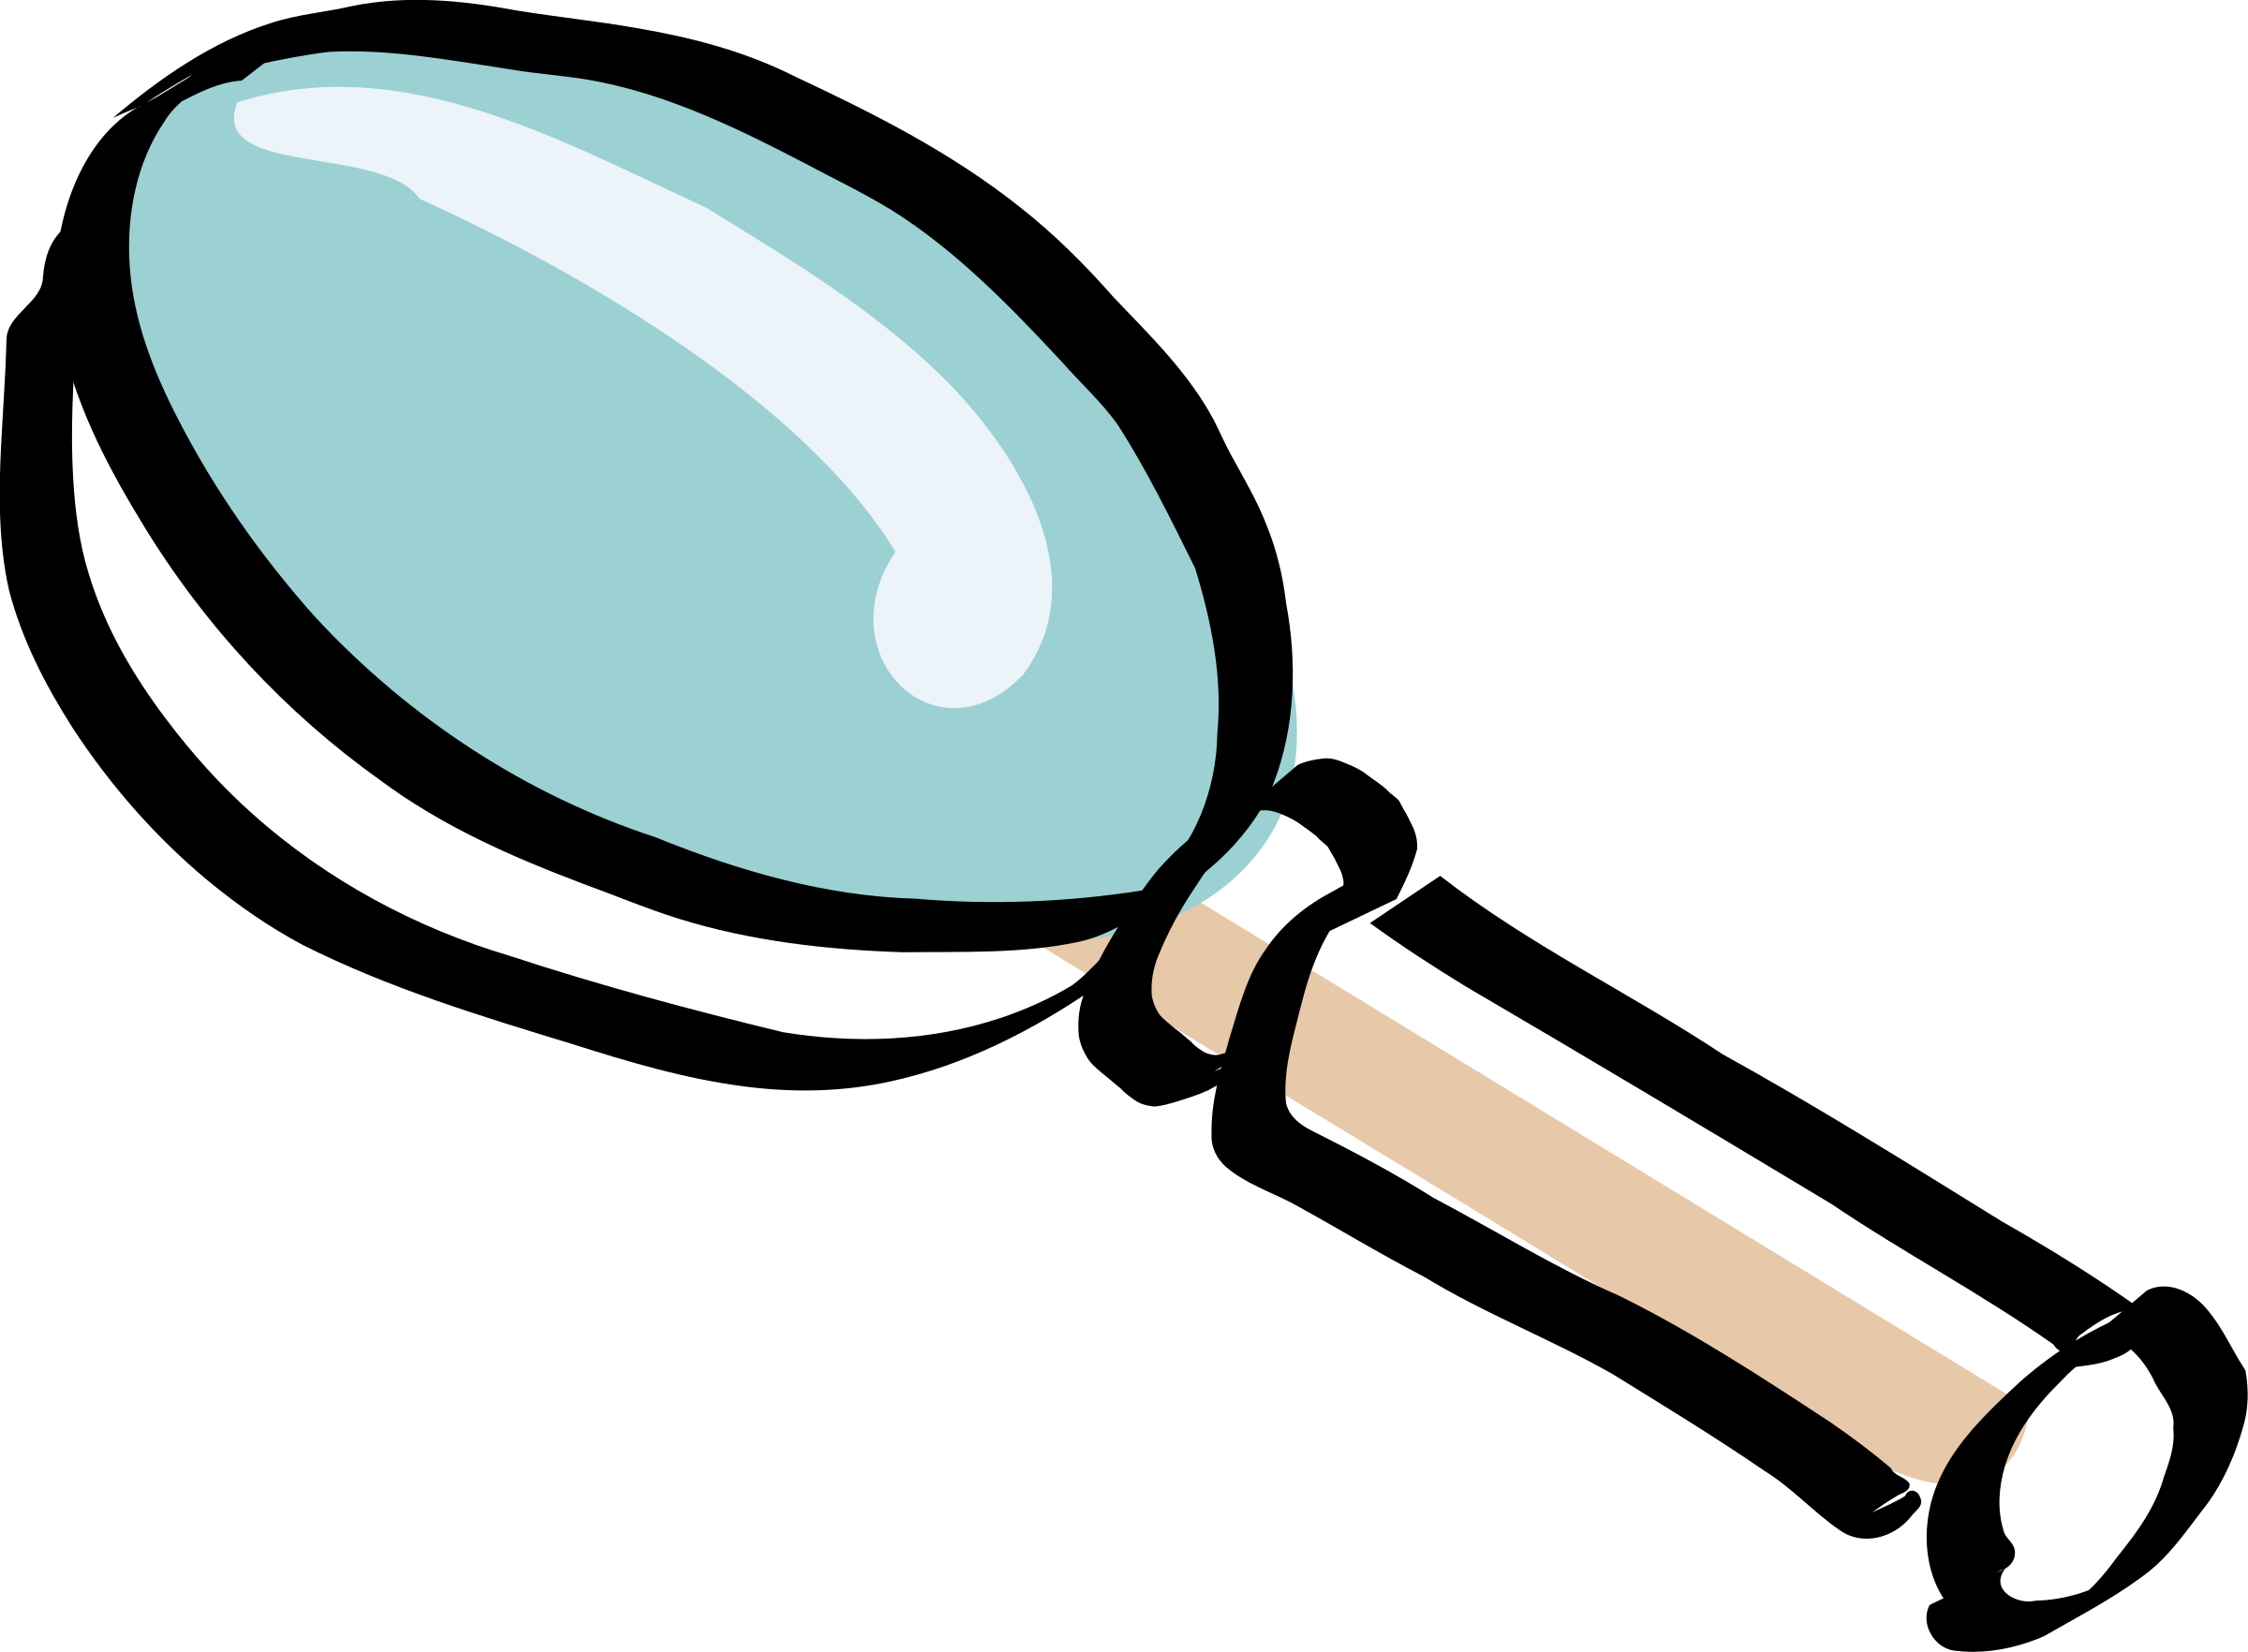 Hands clipart lense. Detective with magnifying glass